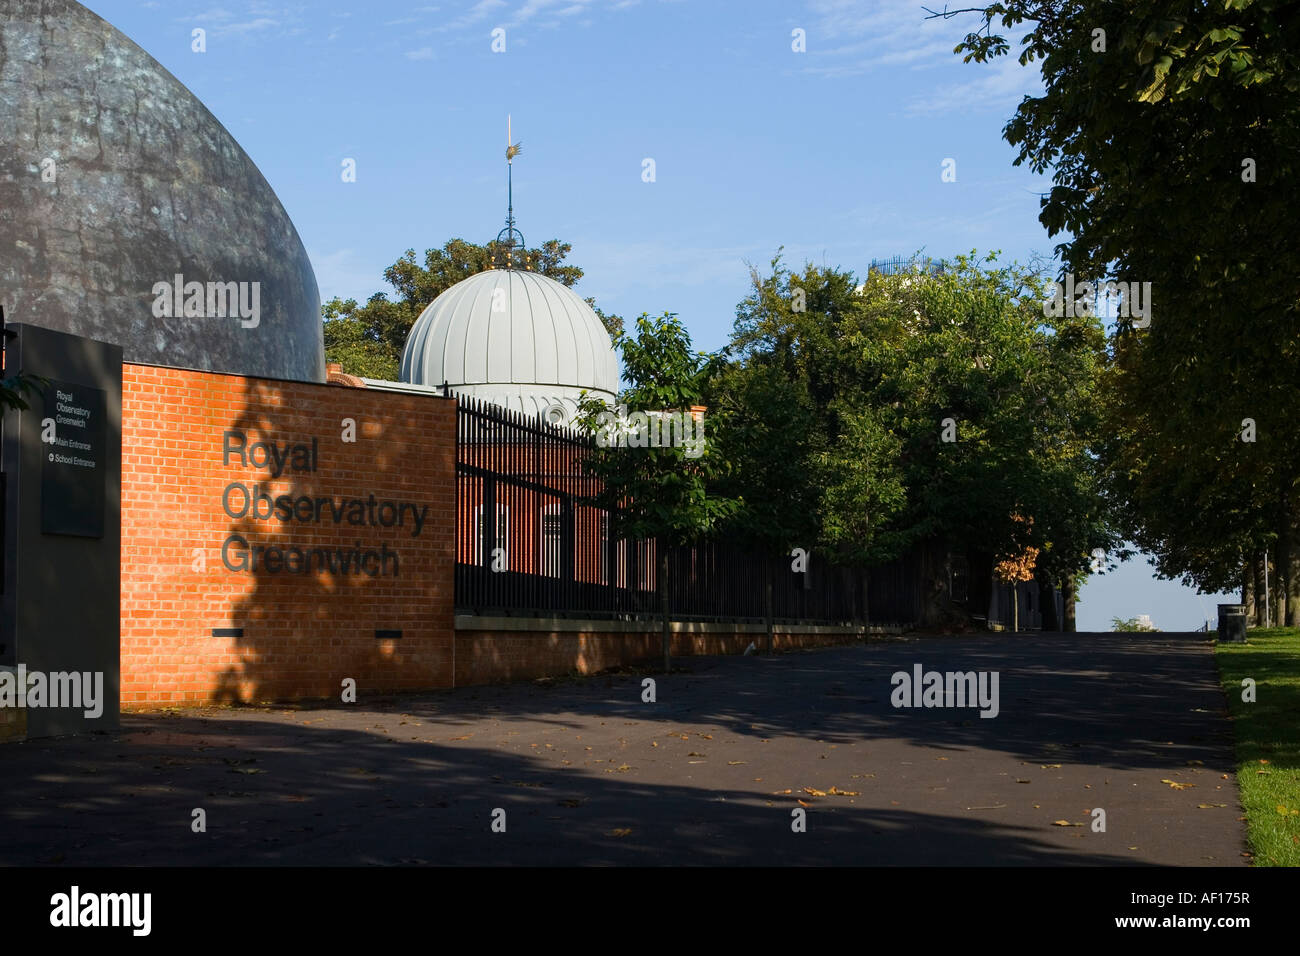 The Royal observatory, Greenwich, London England Stock Photo